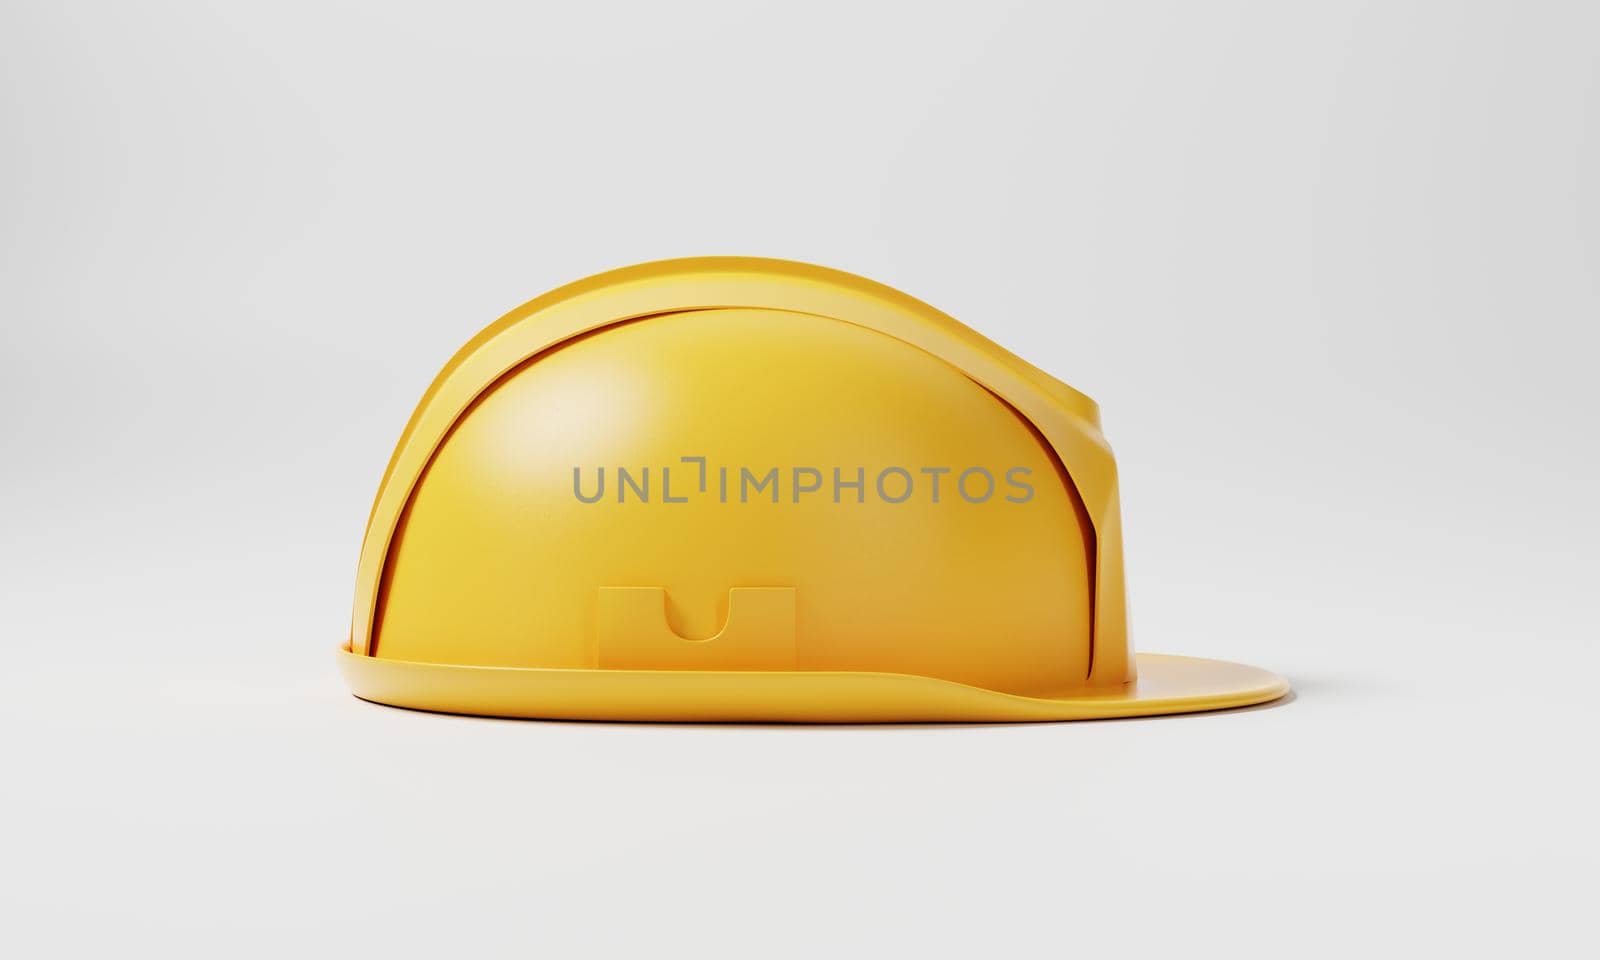 Yellow hard hat safety helmet on white background. Business and construction engineering concept. 3D illustration rendering